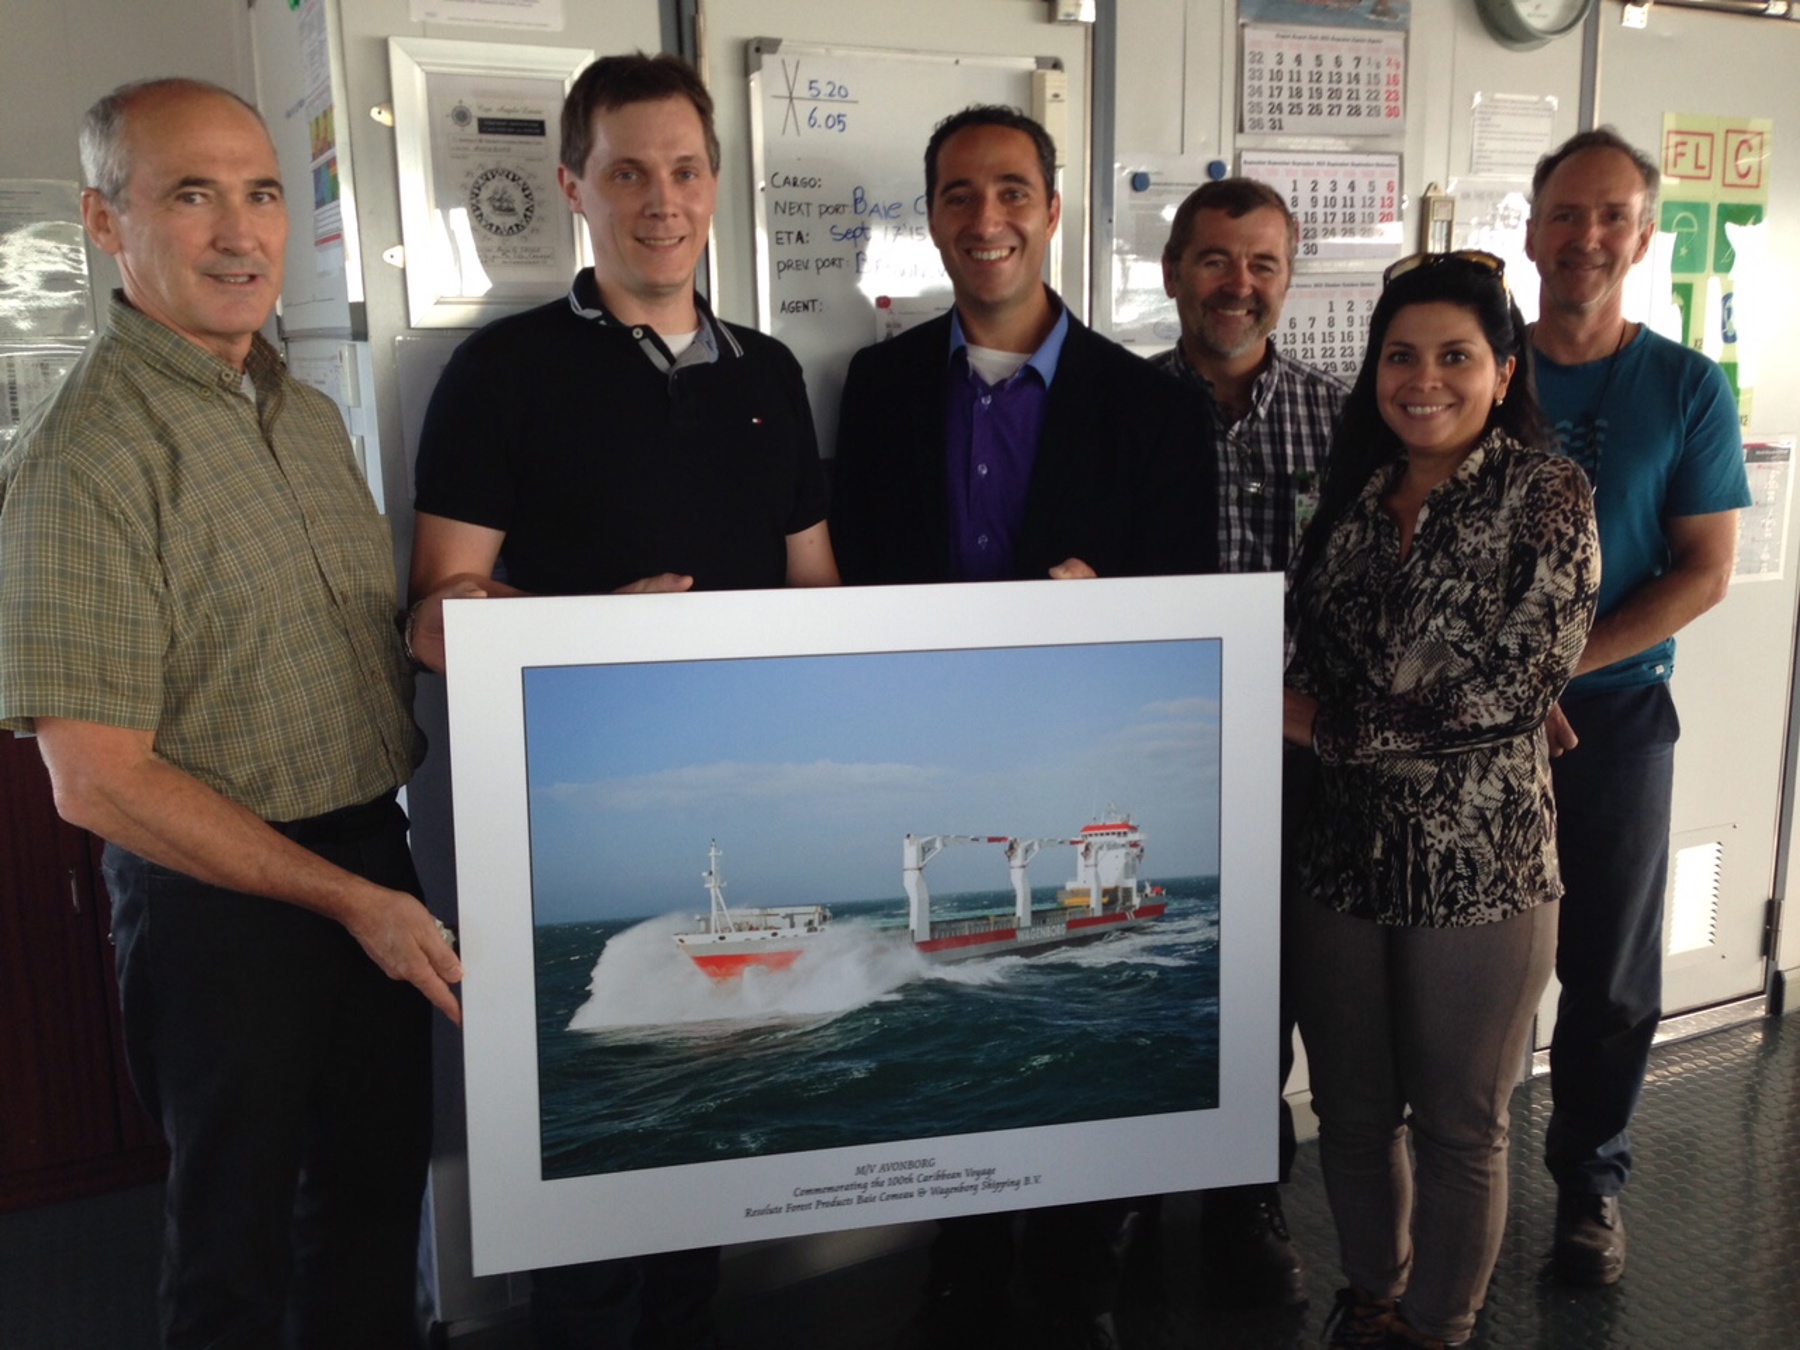 From left to right: Paul Blanchard (Production Manager), Francois -Sebastien Gaudreau (Mill Manager), Marco Renzelli, Guy Hall (Superintendent Finishing and Shipping), Gabriela Ramirez (Commercial Marine) and Andre Michaud Load (Superintendent)